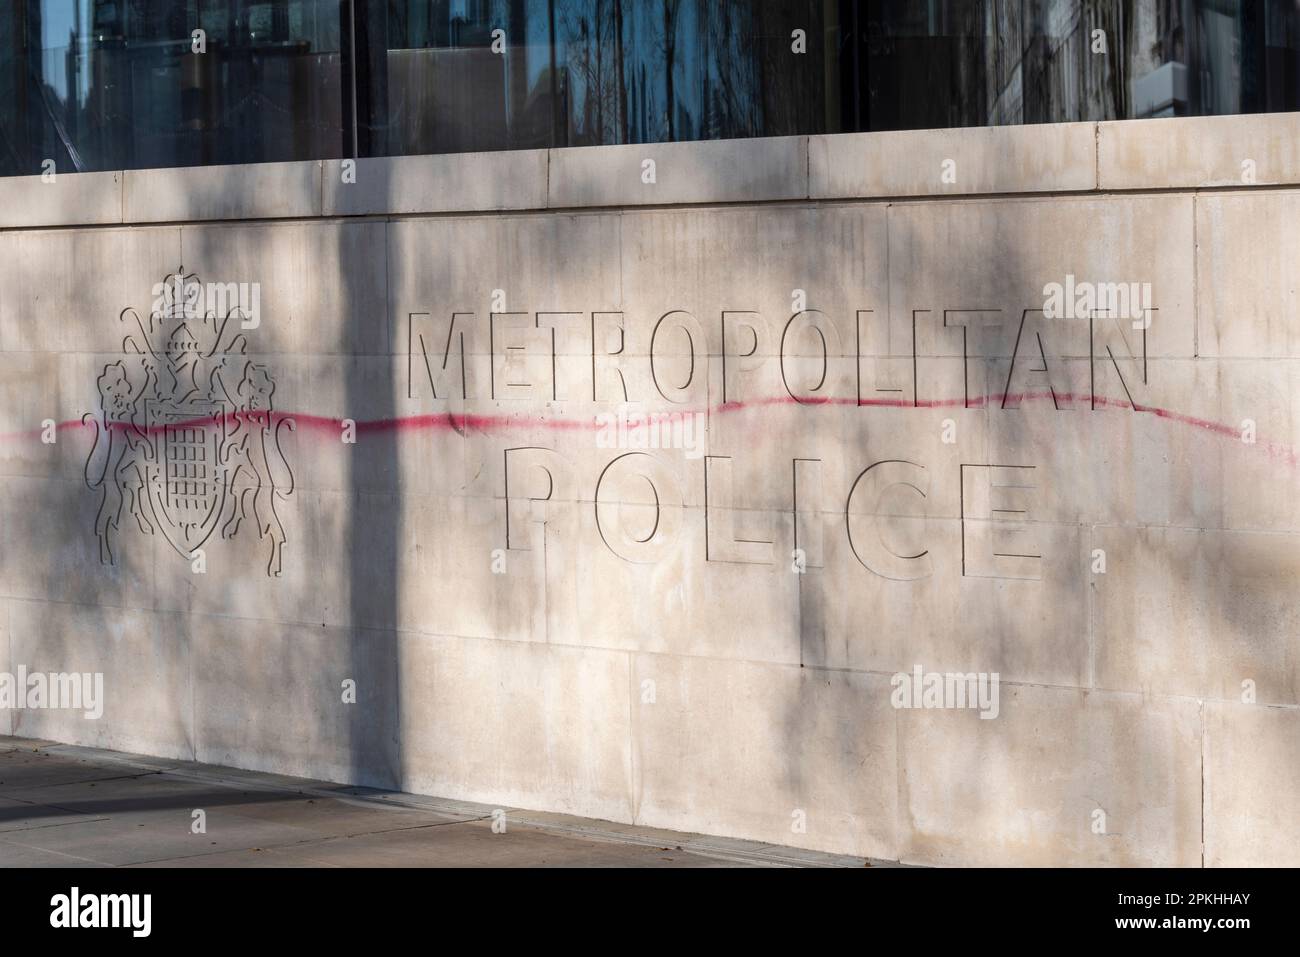 Victoria Embankment, Westminster, London, UK. 7th Apr, 2023. The New Scotland Yard headquarters of the Metropolitan Police in London has been vandalised with a red line of paint sprayed along its front wall Stock Photo